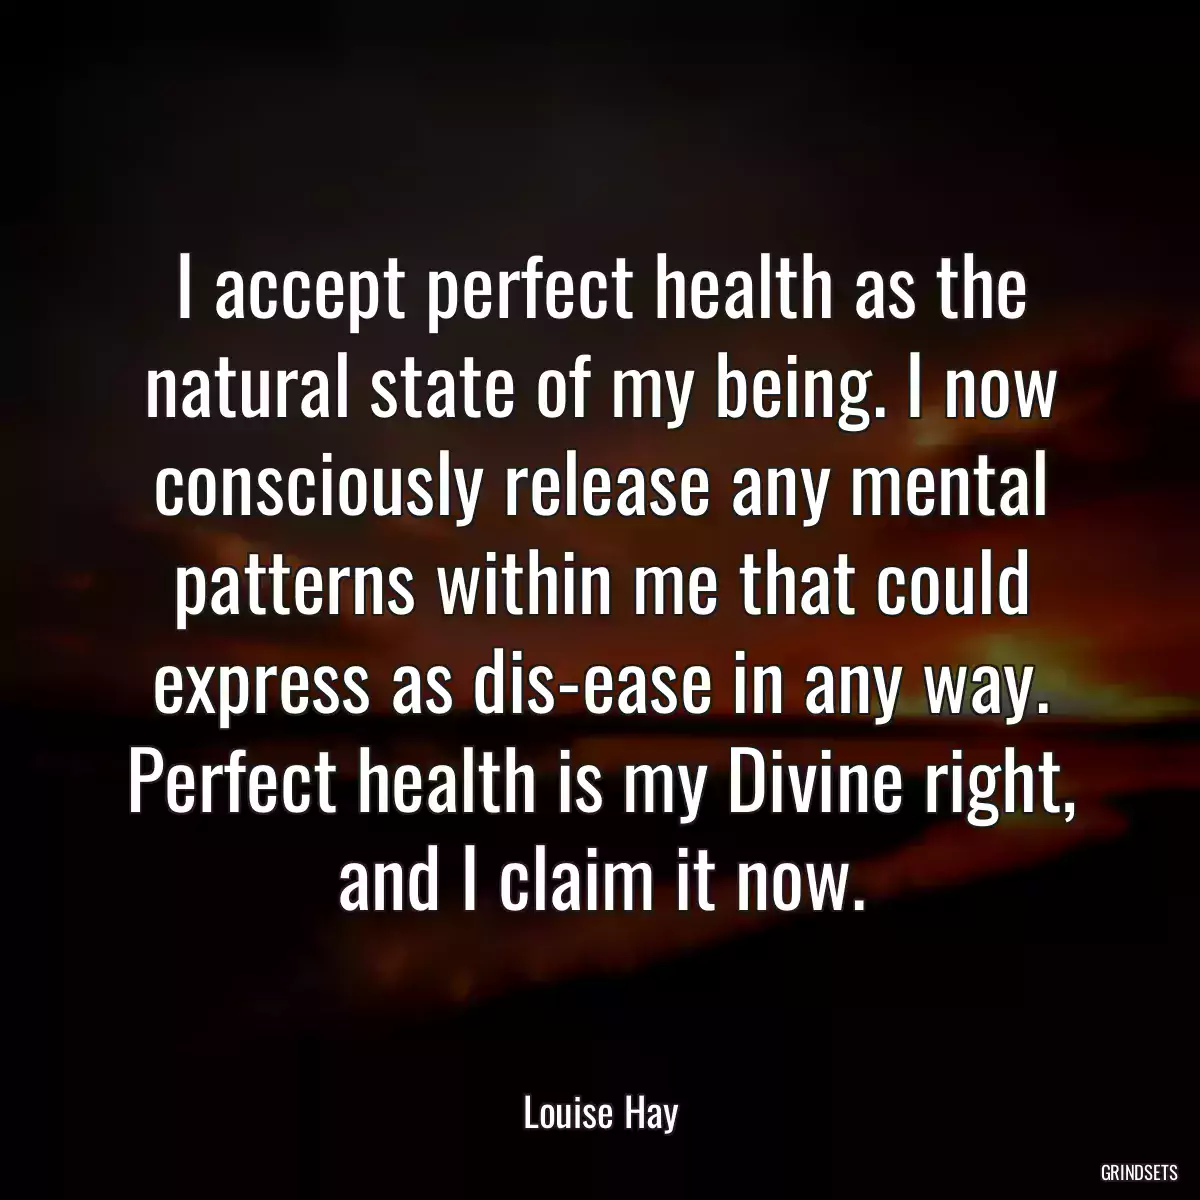 I accept perfect health as the natural state of my being. I now consciously release any mental patterns within me that could express as dis-ease in any way. Perfect health is my Divine right, and I claim it now.